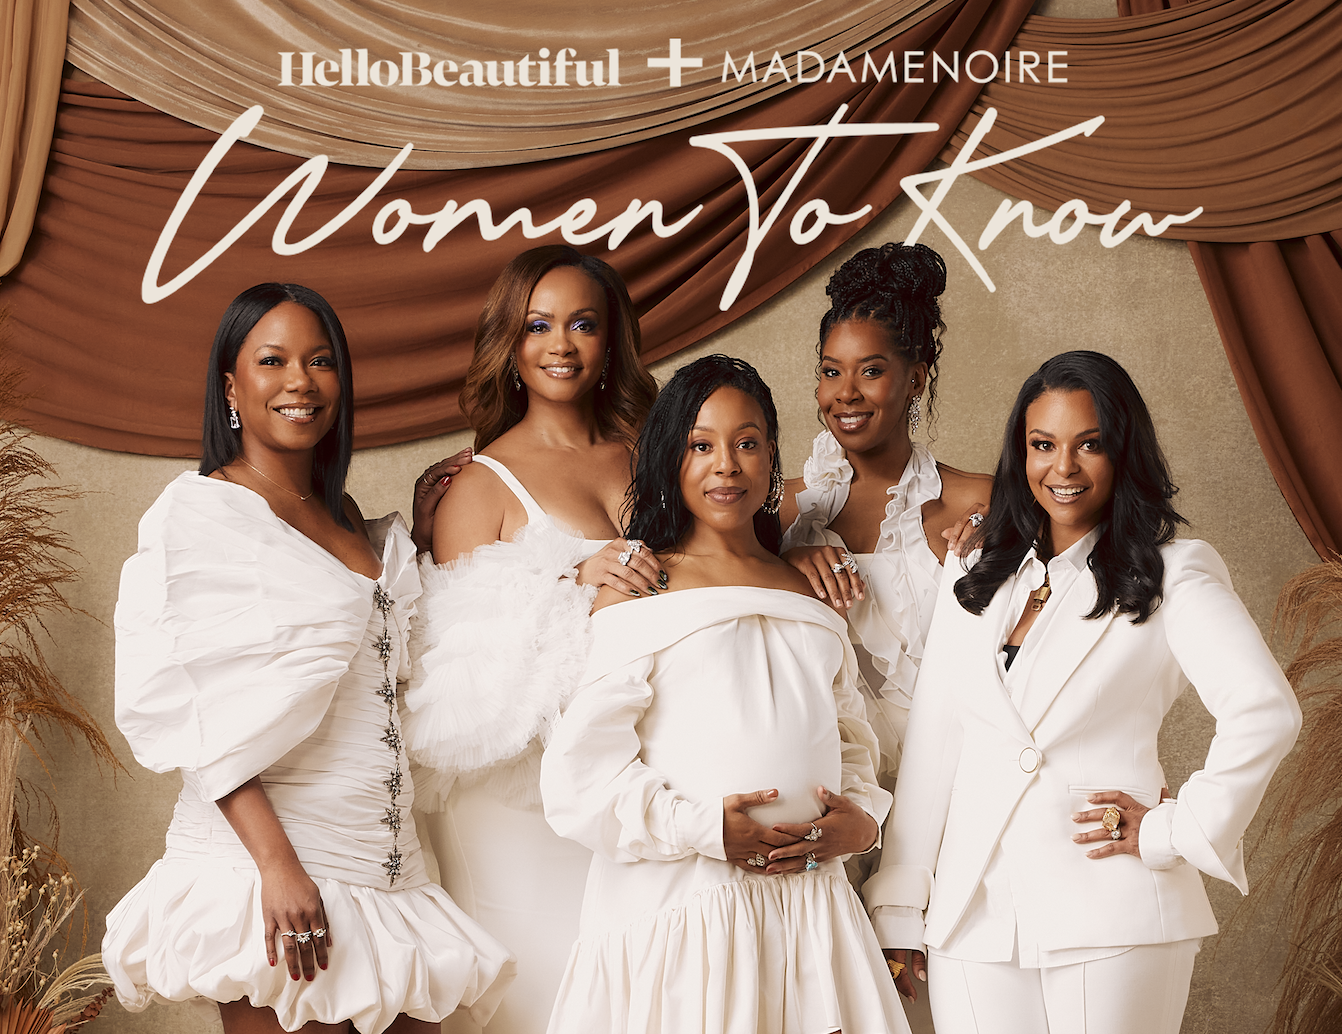 Women to Know: Alana Mayo, Tara Duncan, Nicole Brown, Amber Rasberry and Niija Kuykendall share empowering stories in new, ground-breaking roundtable discussion about diversity in Hollywood and how they each found success